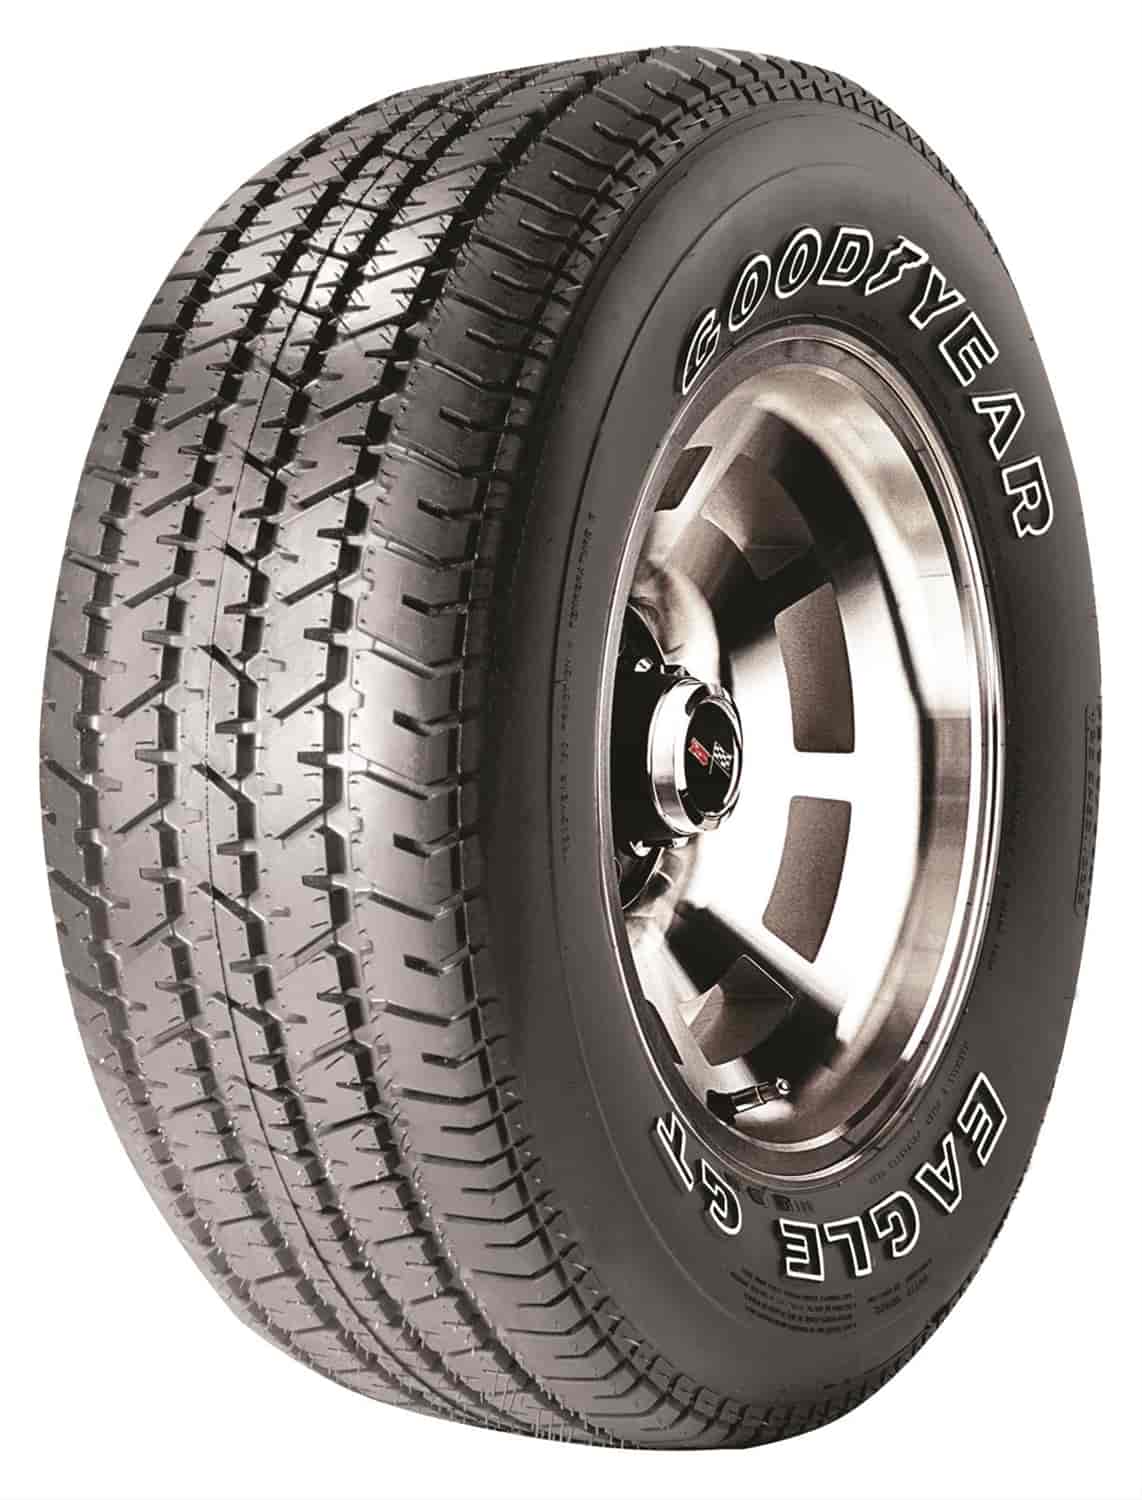 Goodyear Collector Series Eagle GT Tire